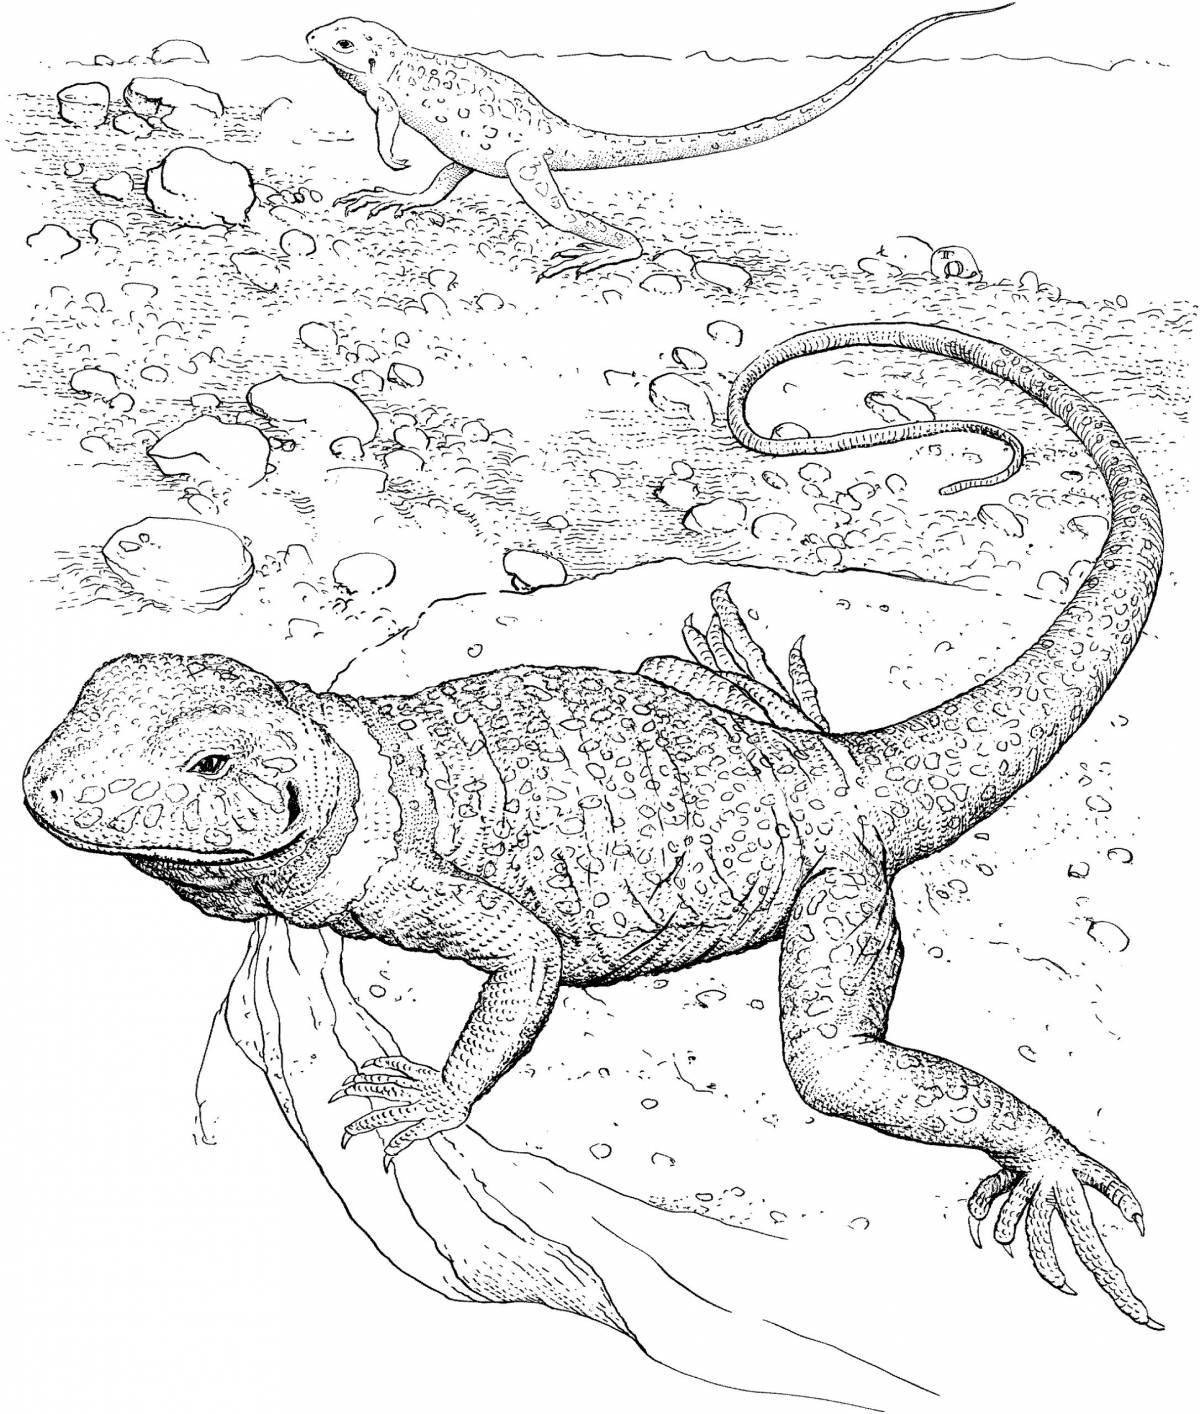 Attractive bearded dragon coloring page